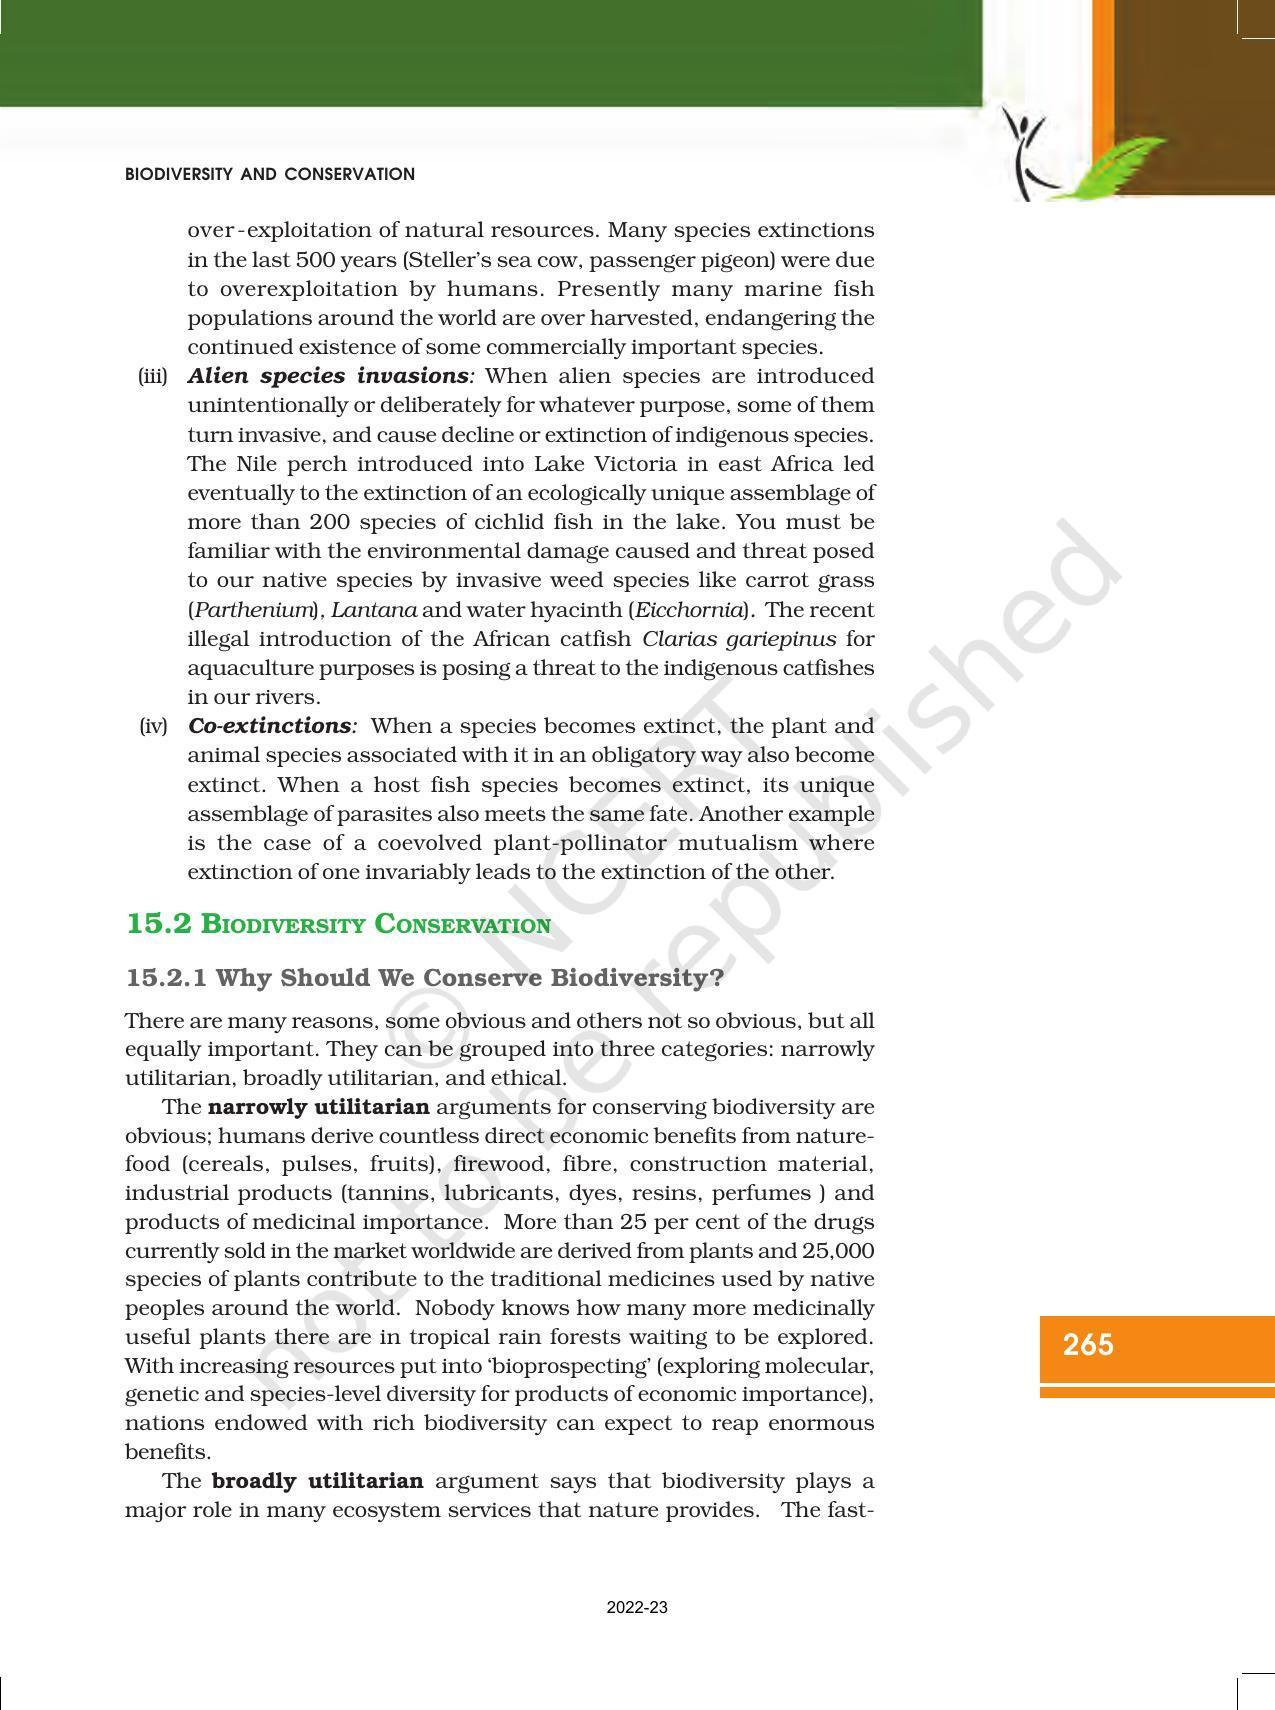 NCERT Book for Class 12 Biology Chapter 15 Biodiversity and Conservation - Page 8